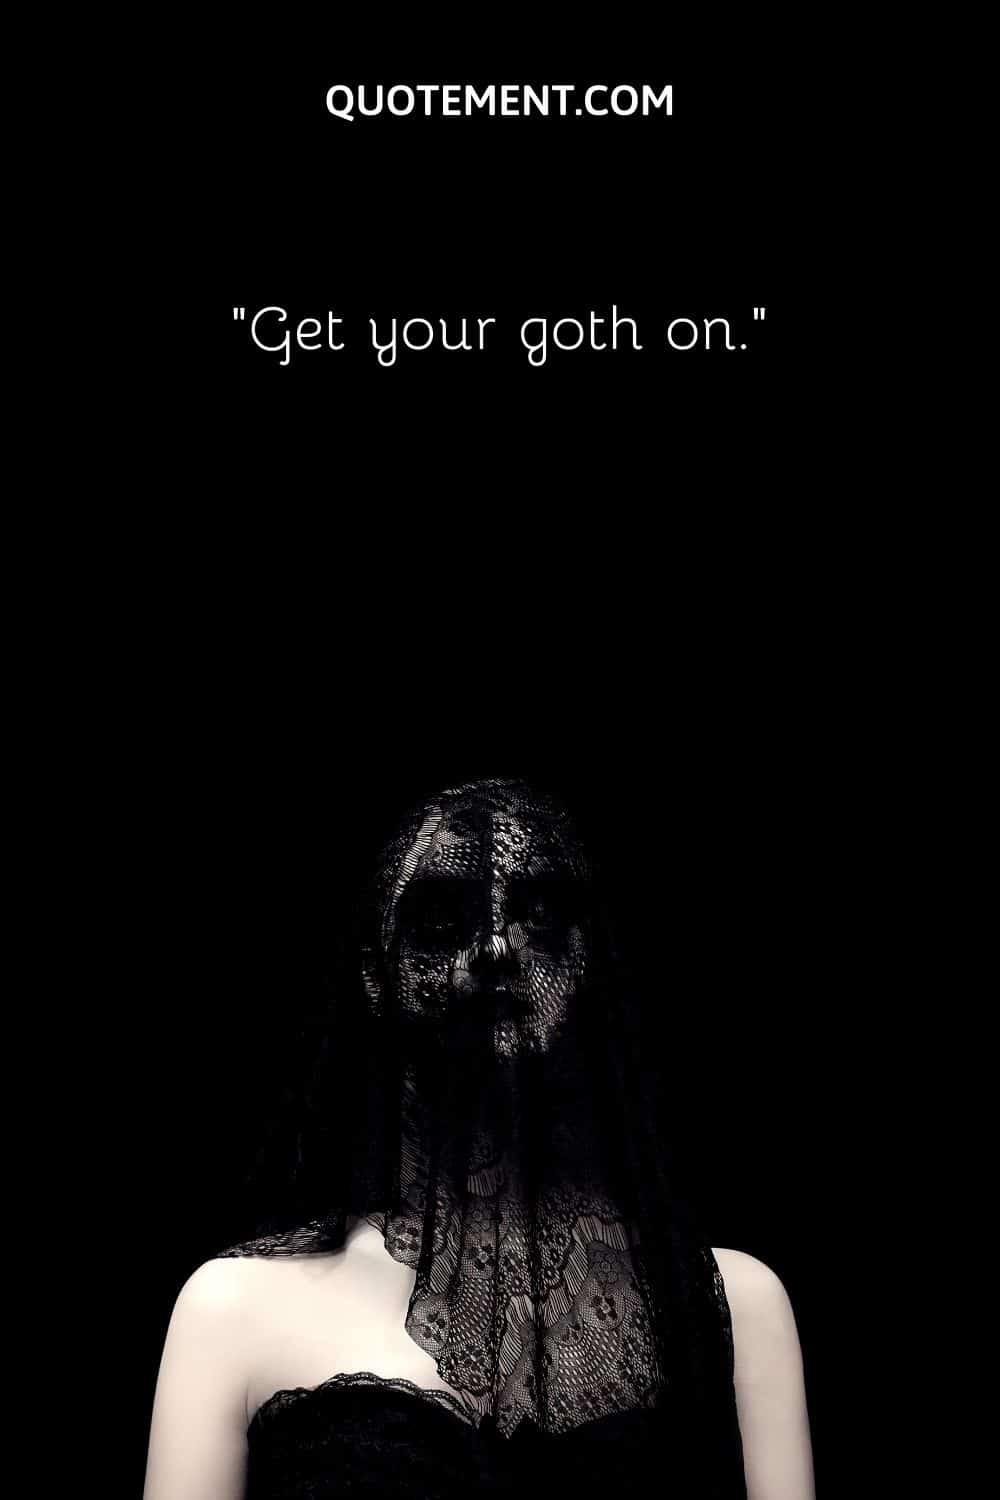 Get your goth on